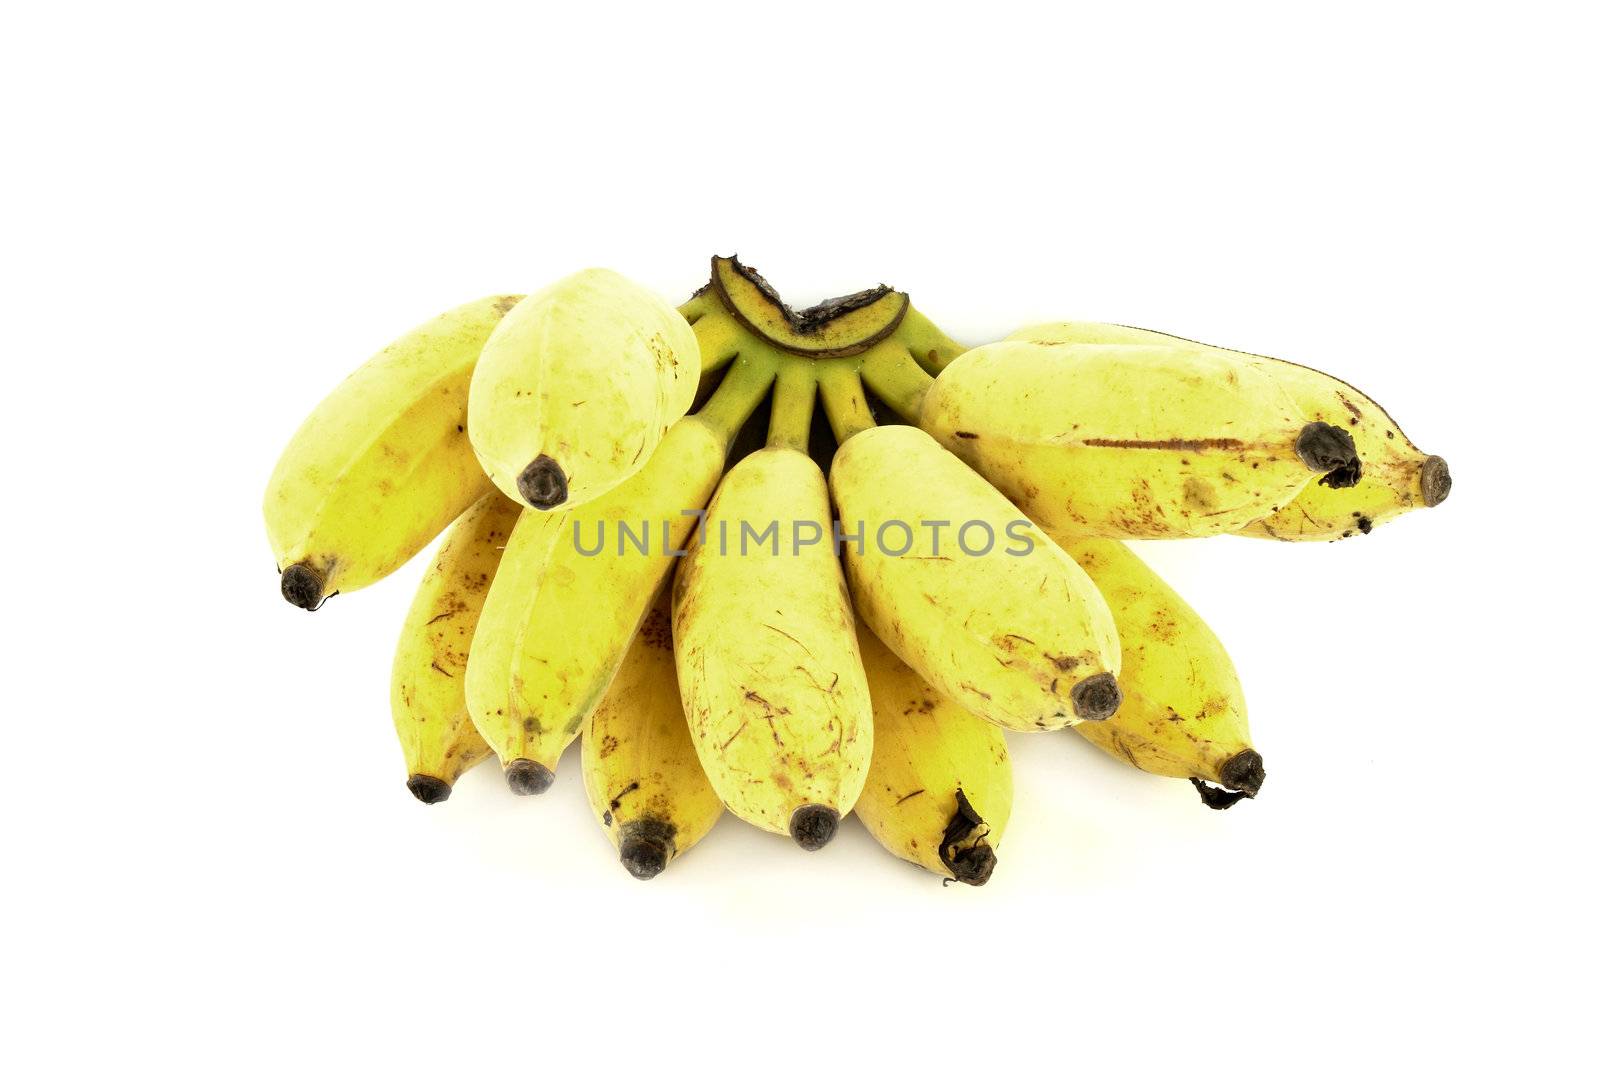 bunch of over ripe bananas on white background by geargodz